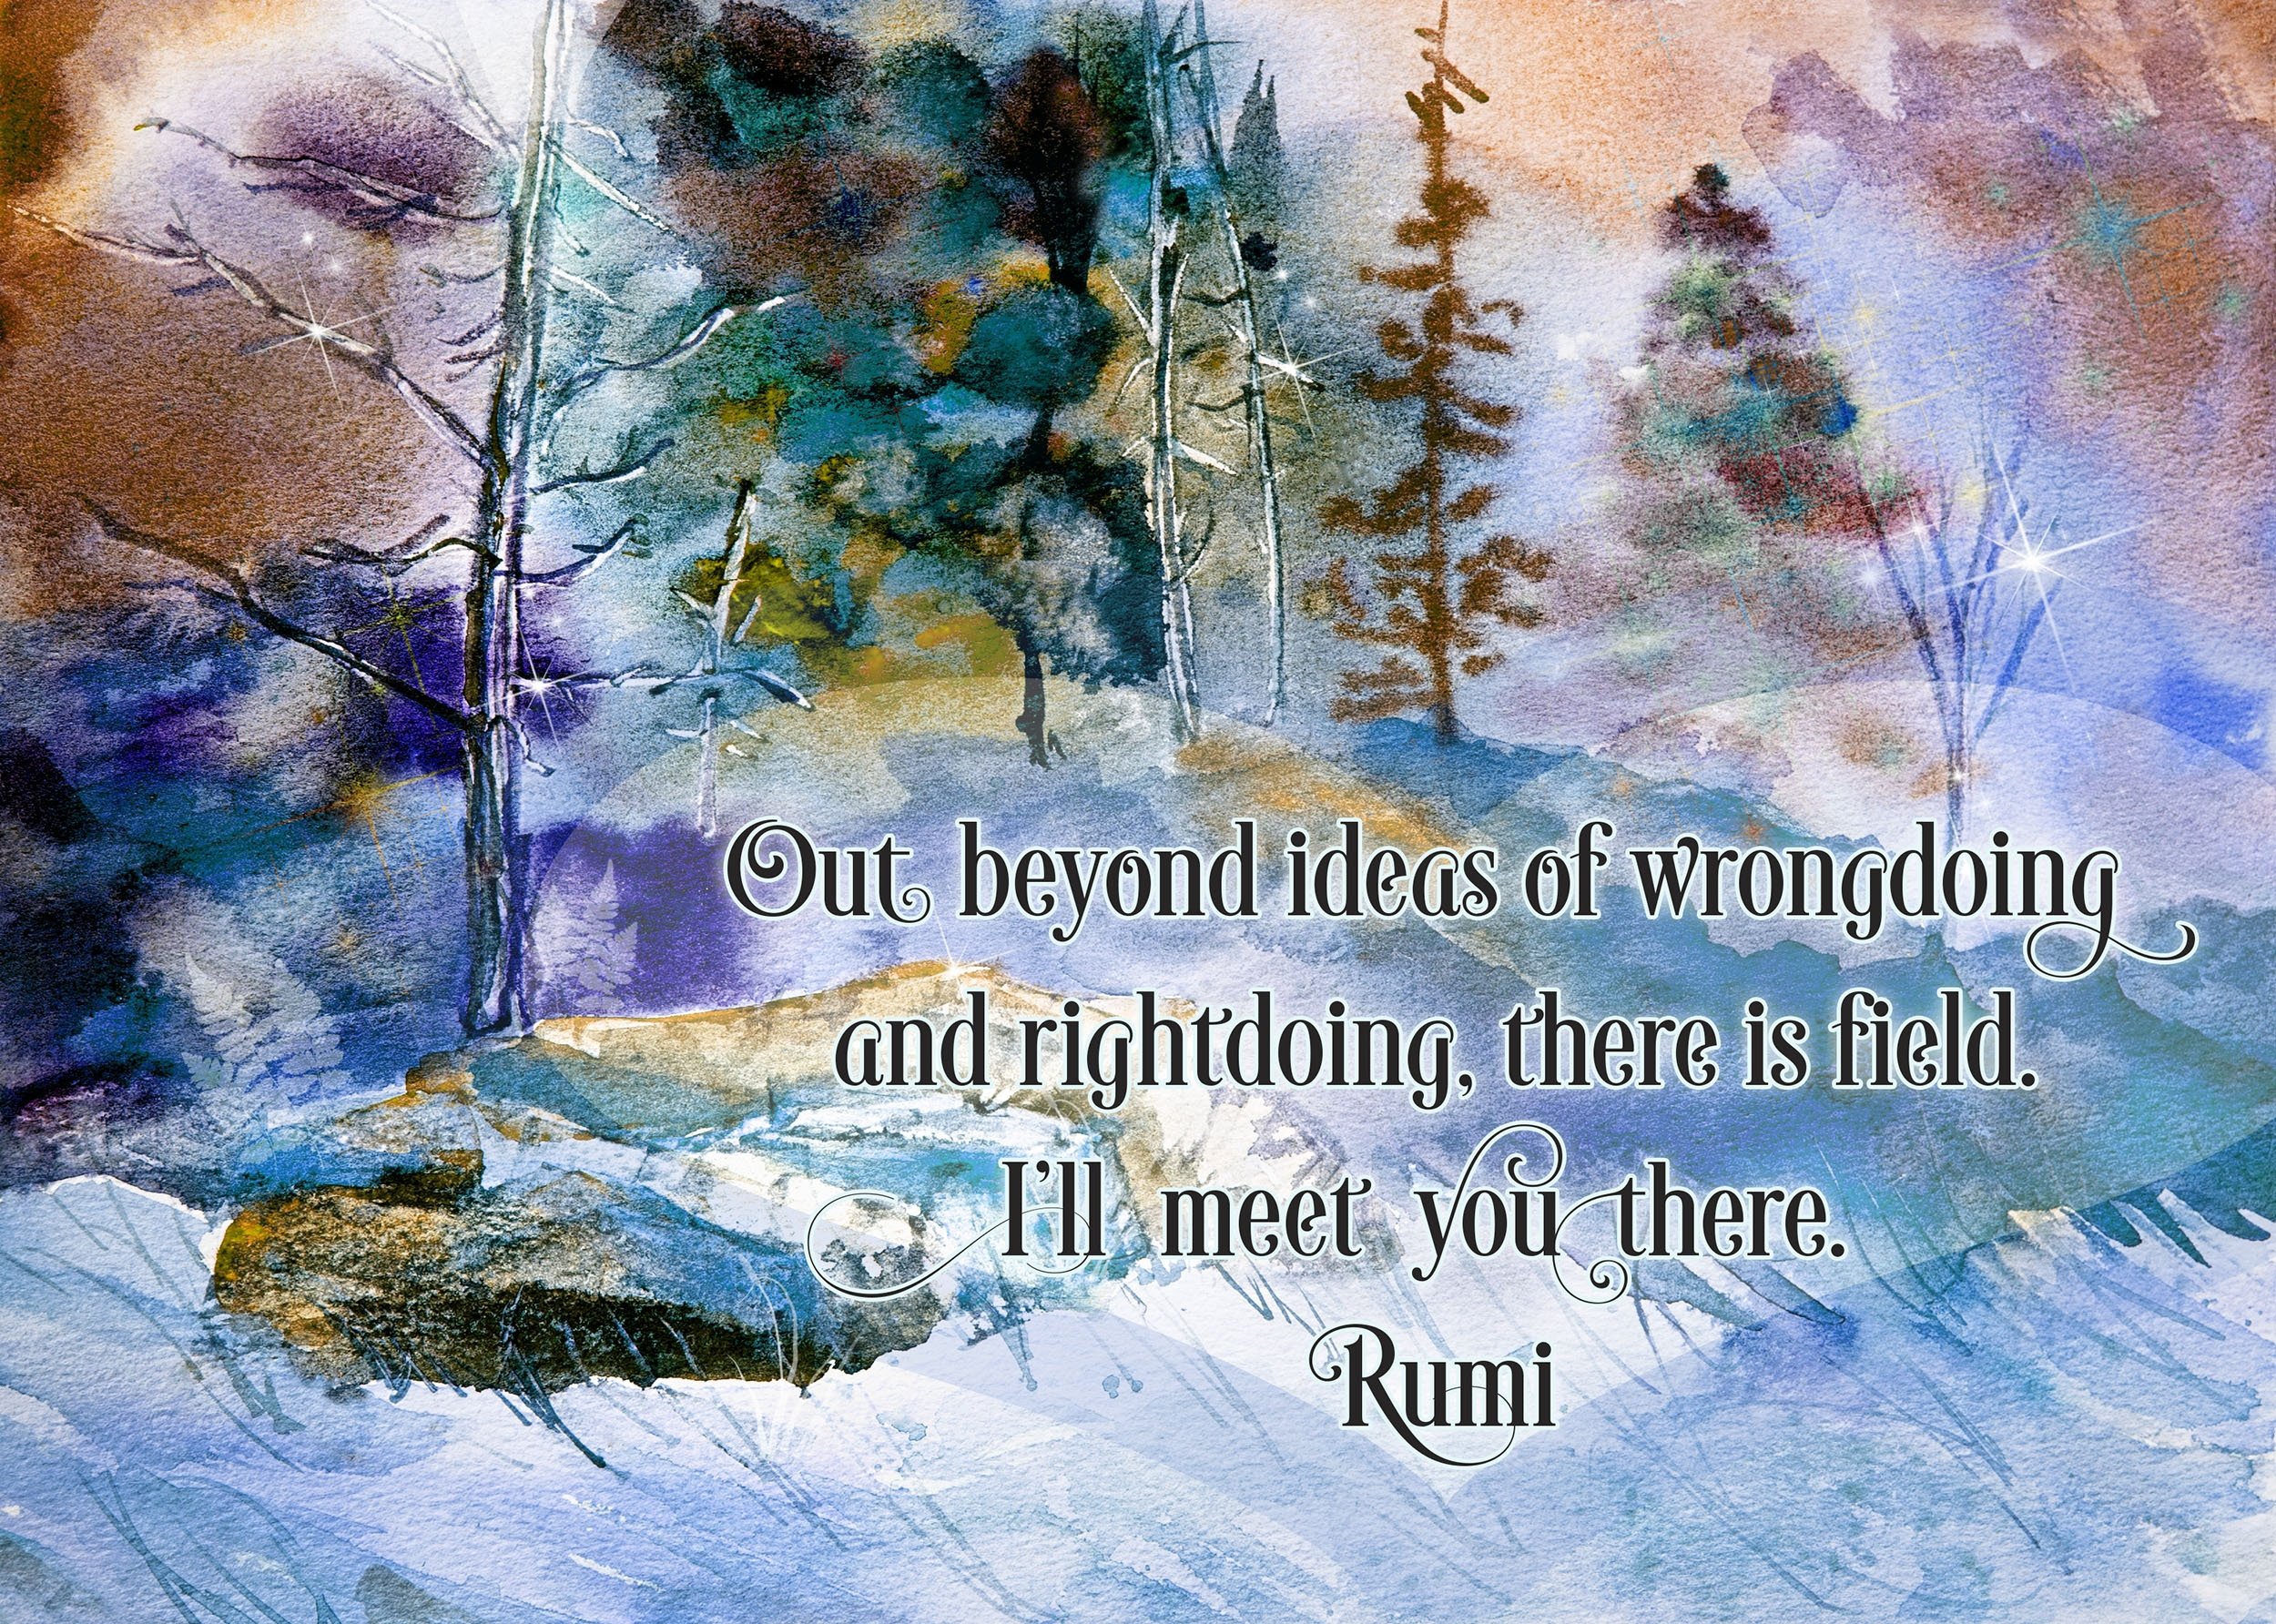 A watercolor painting with an inspiring message by Mevlana Jalaladdin Rumi 